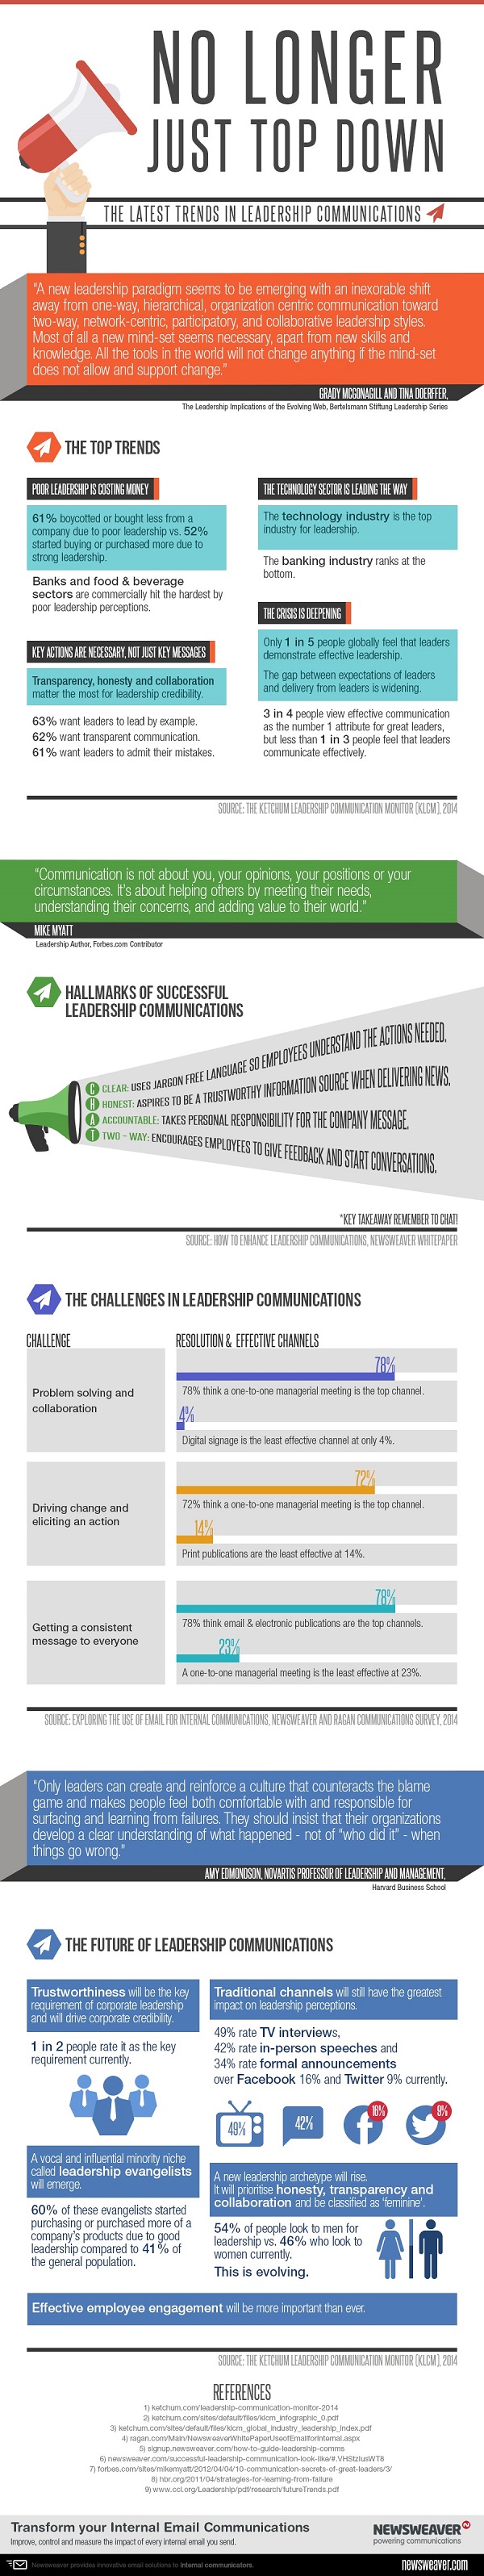 Latest Trends in Leadership Communications